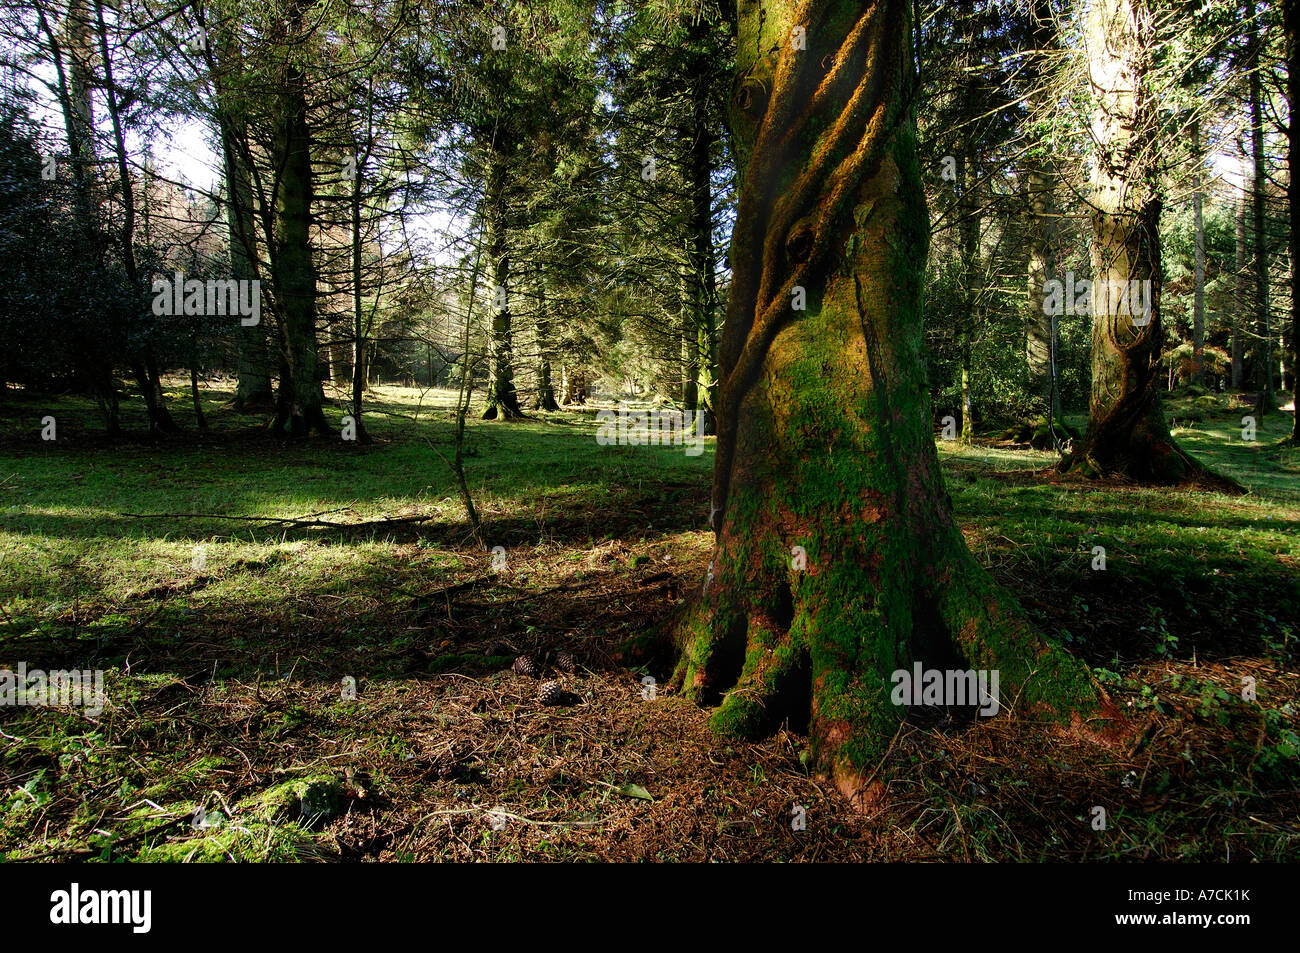 Densely forested woodland with single large tree trunk in the foreground enwrapped with thick creeper vines Stock Photo